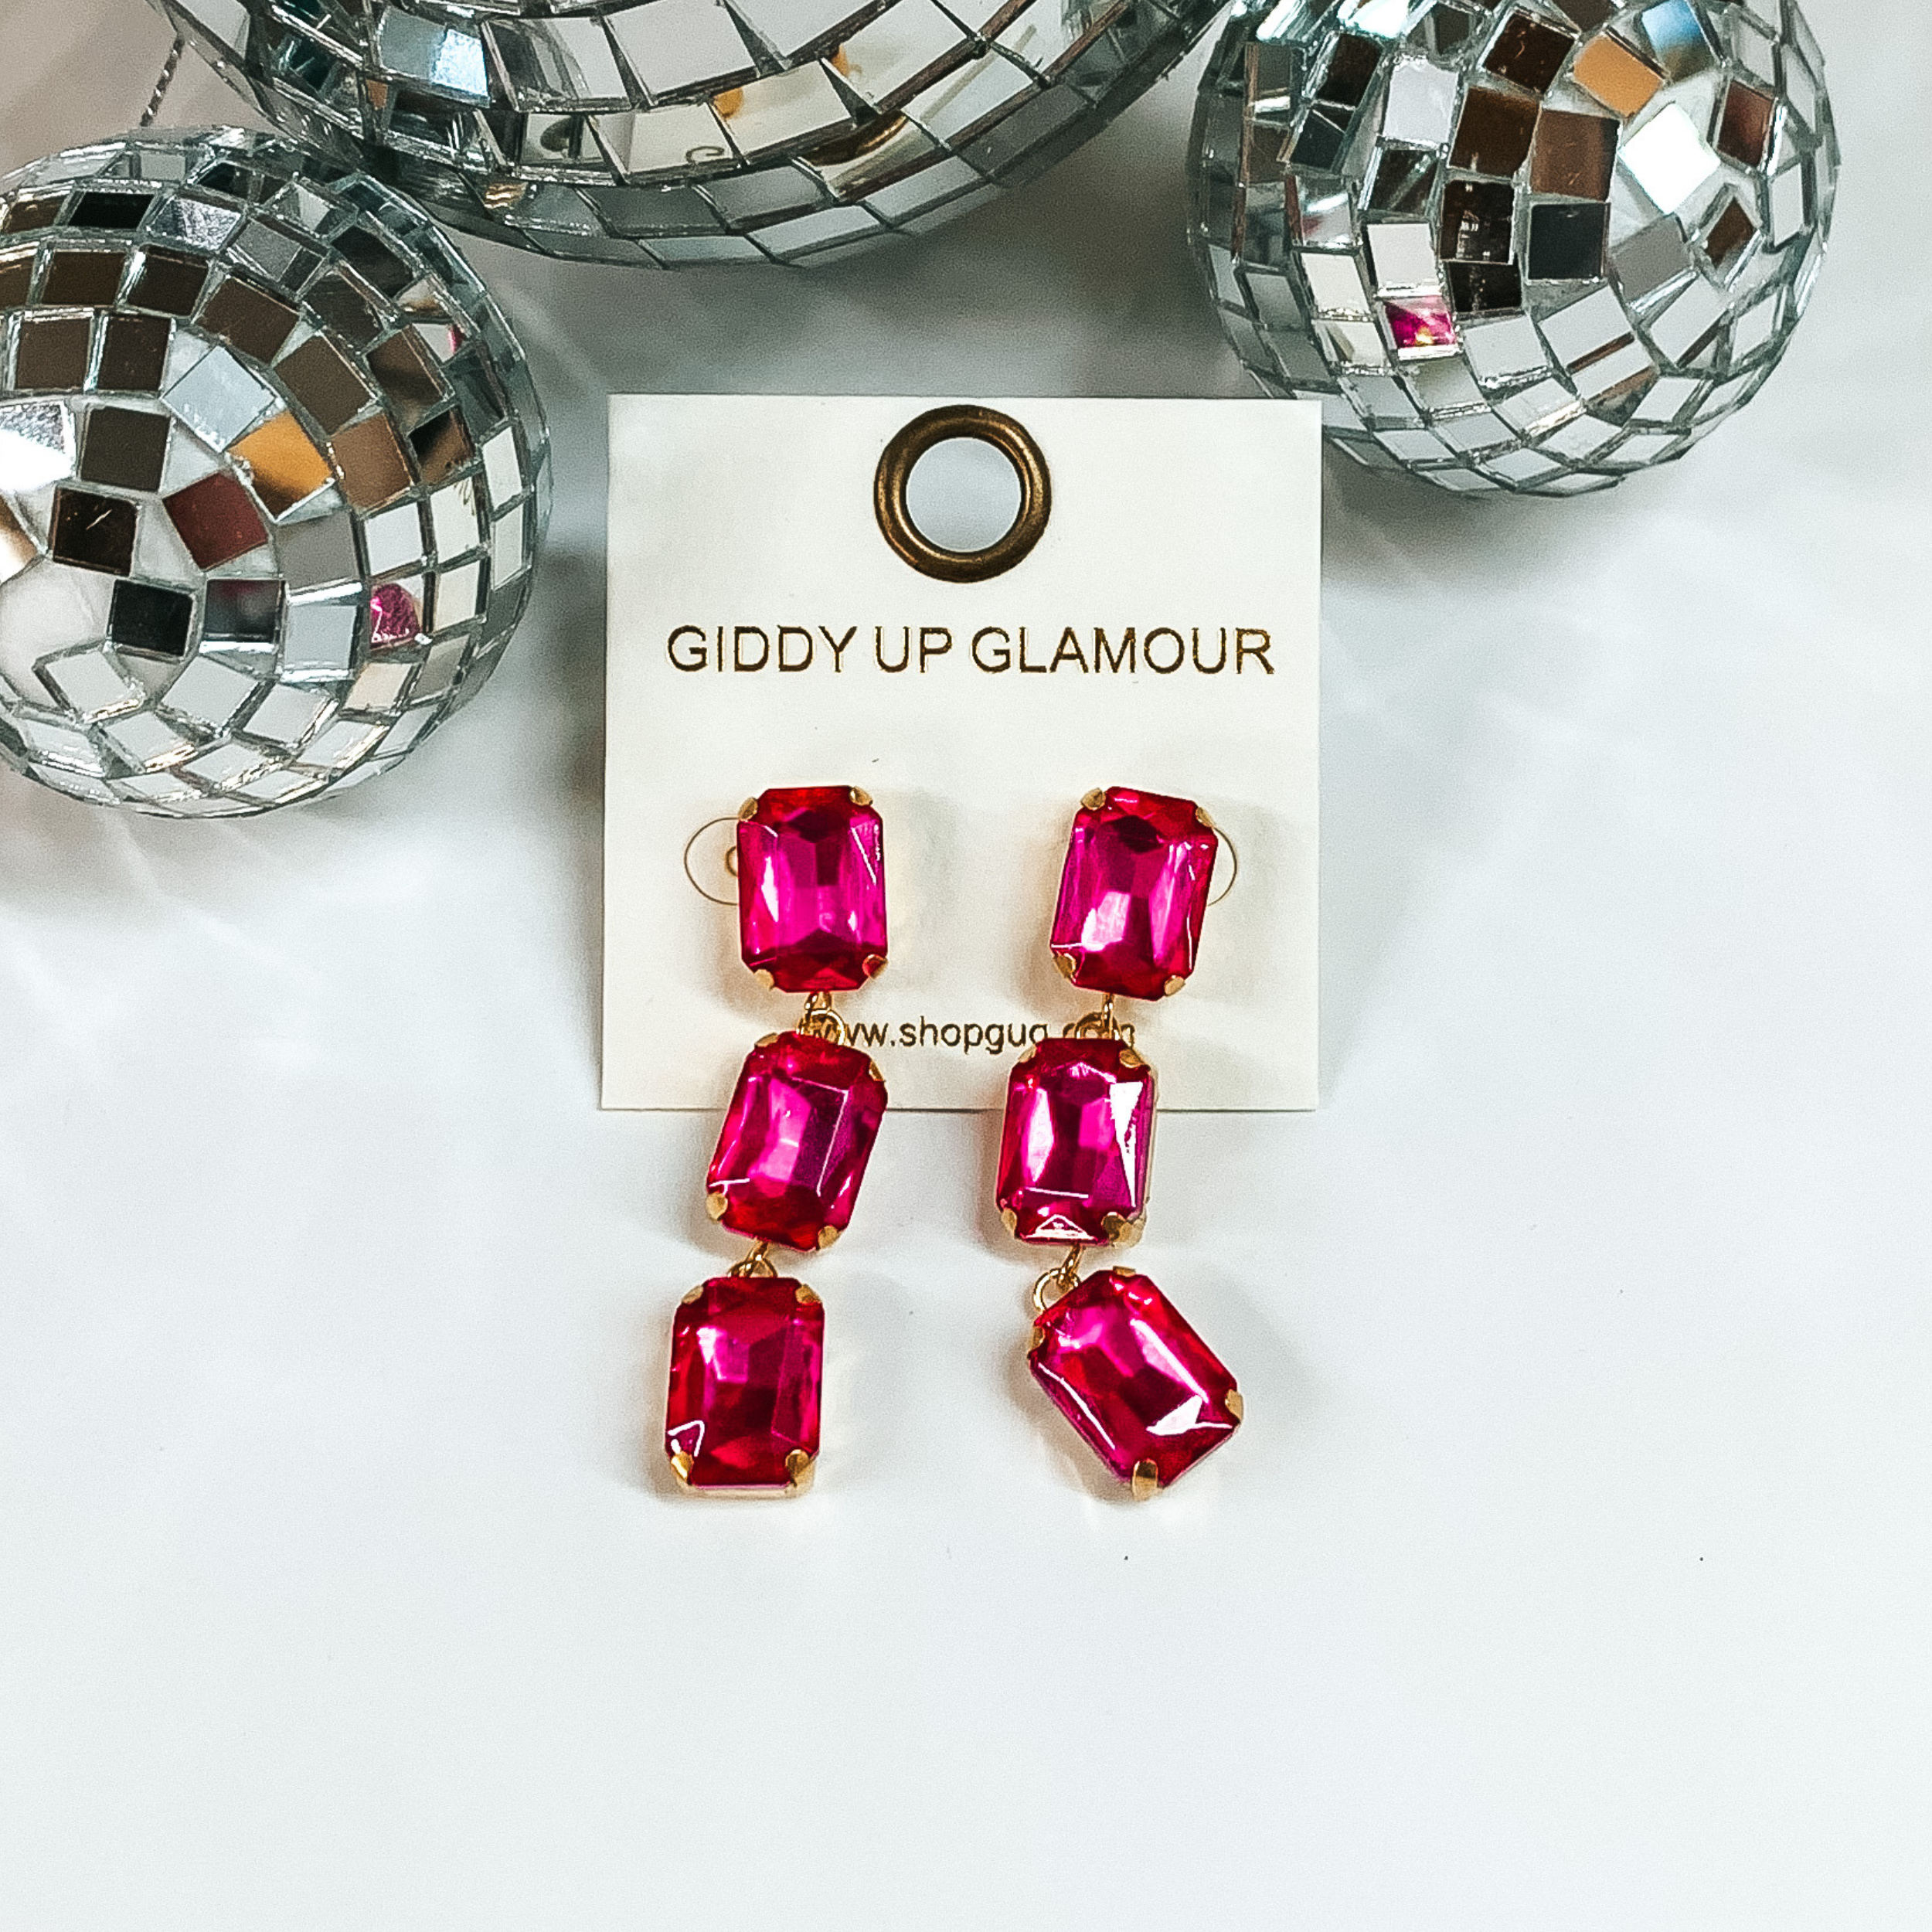 These stunning earrings add the perfect amount of sparkle. Earrings feature three rectangle crystal stones in a gold tone setting. Earrings are placed on a white board with three disco balls at the top. 